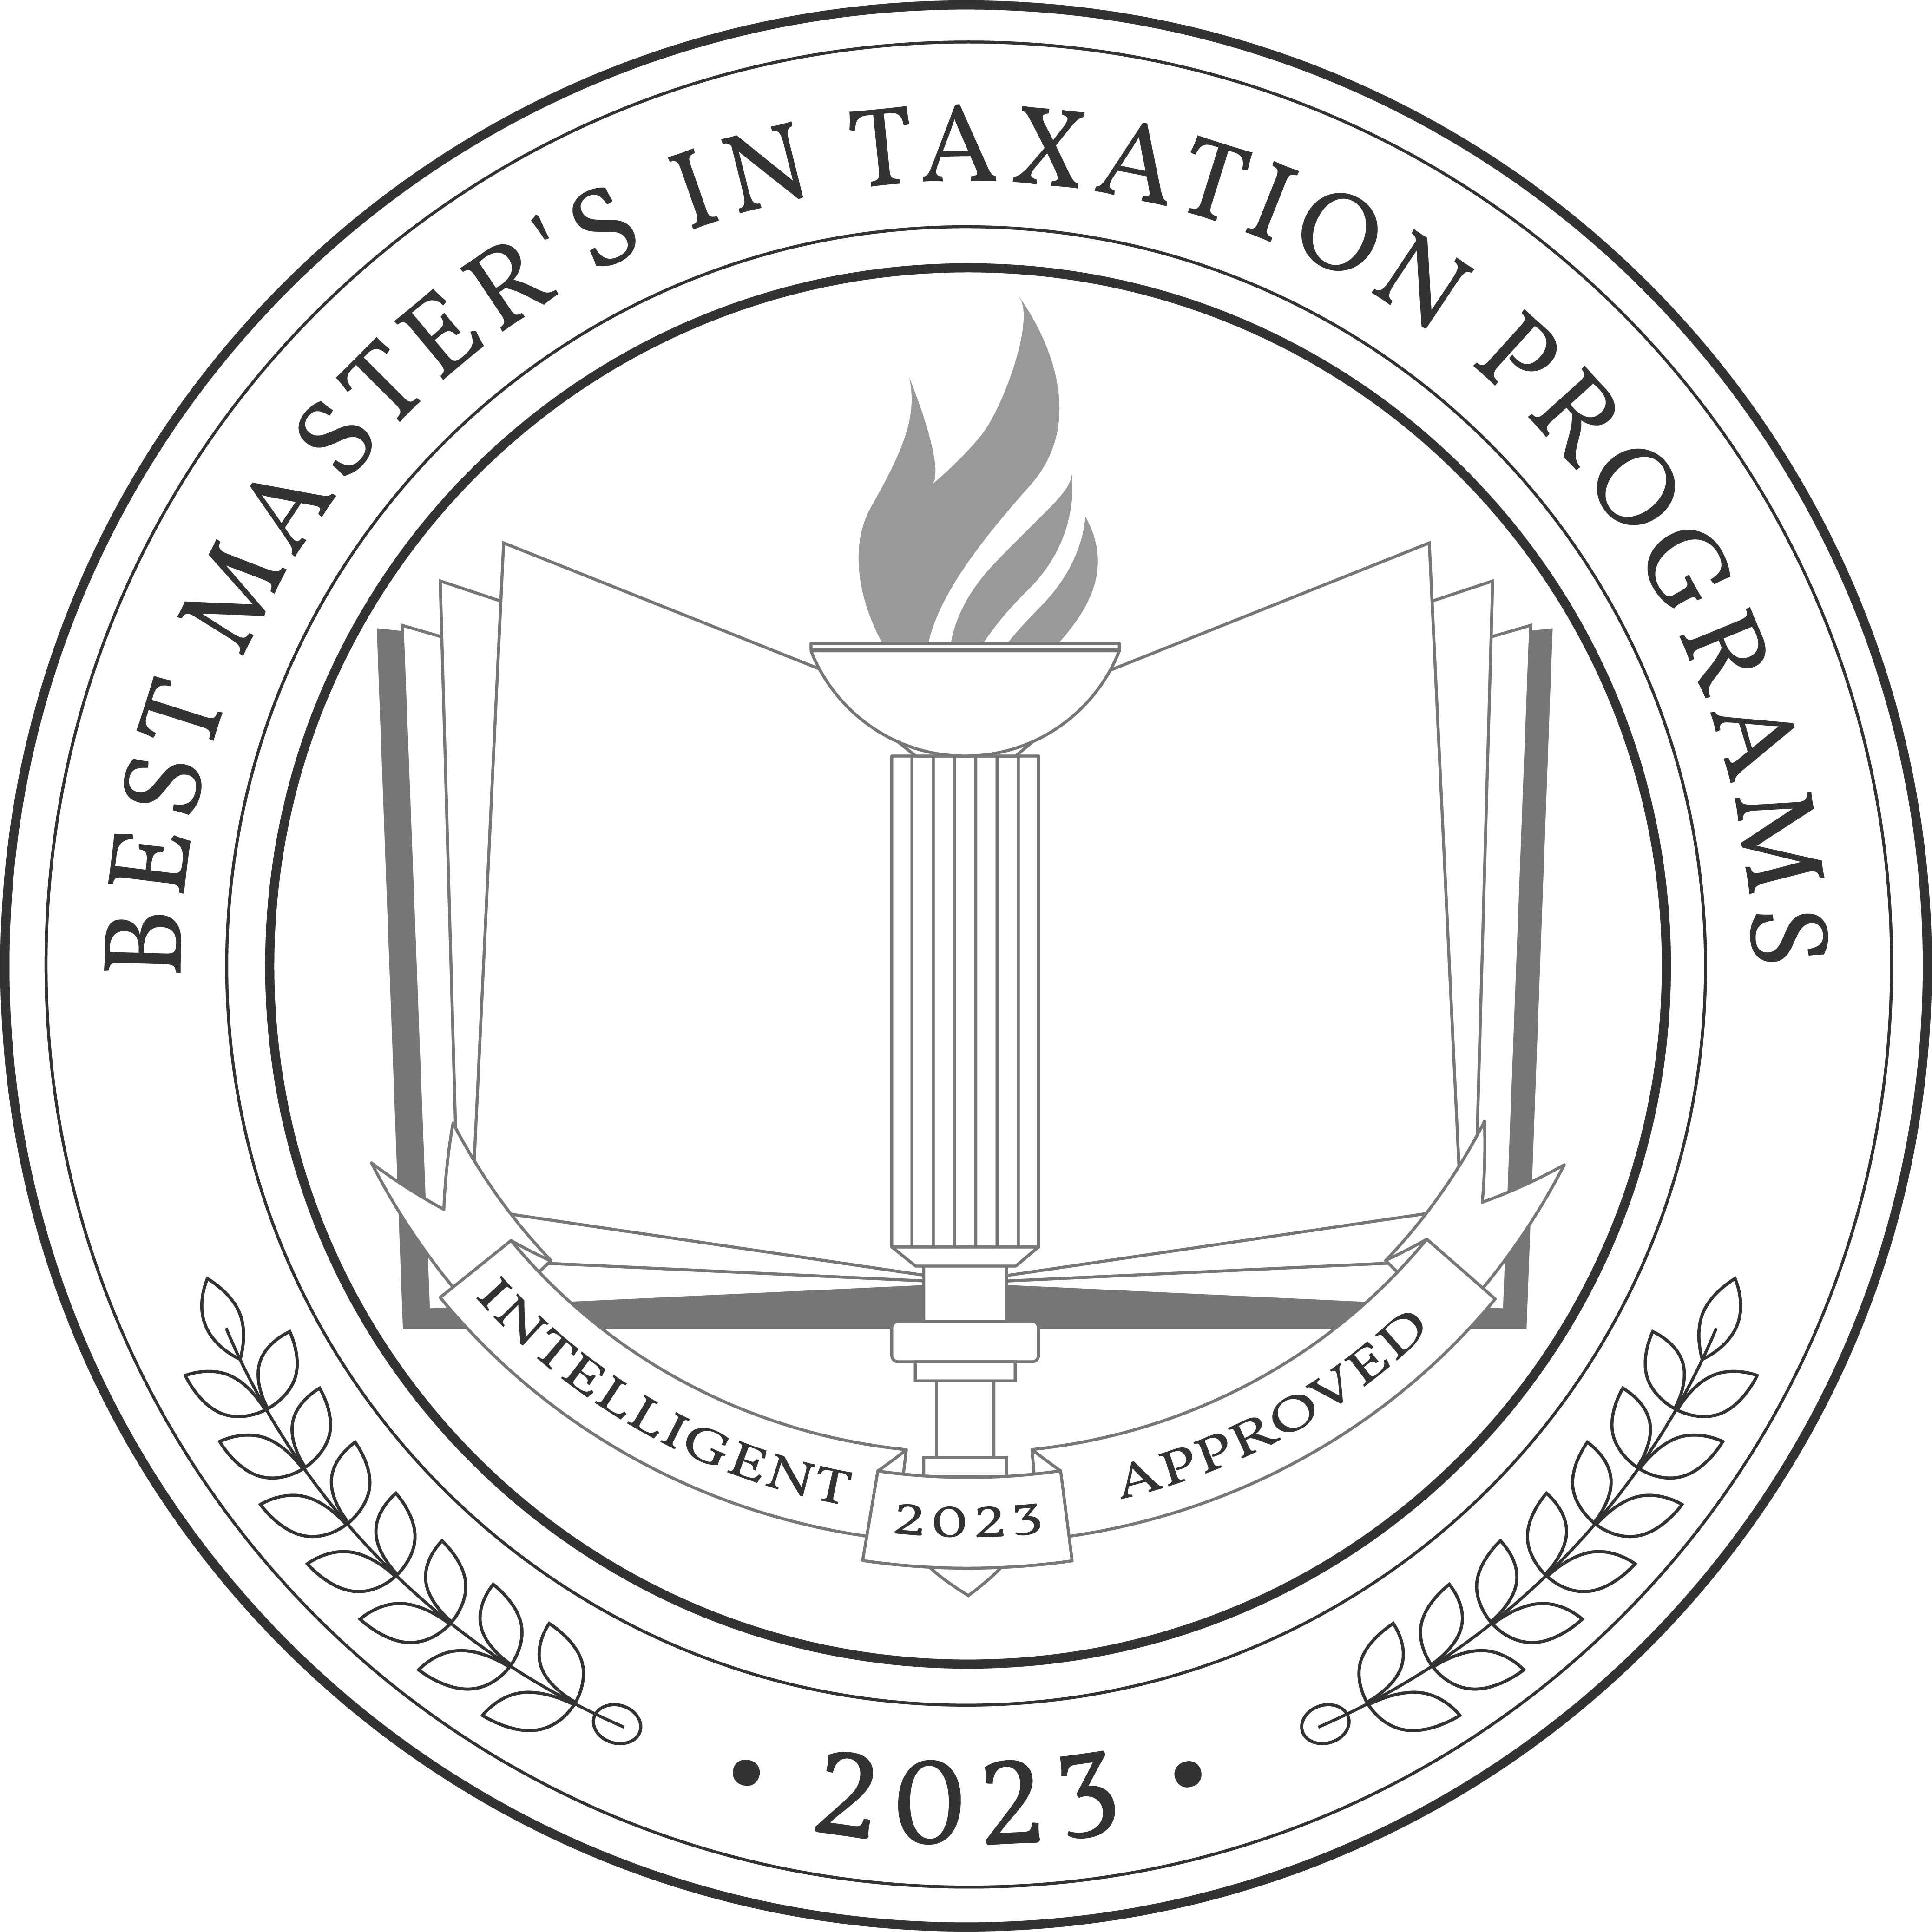 Best Master's in Taxation Programs badge